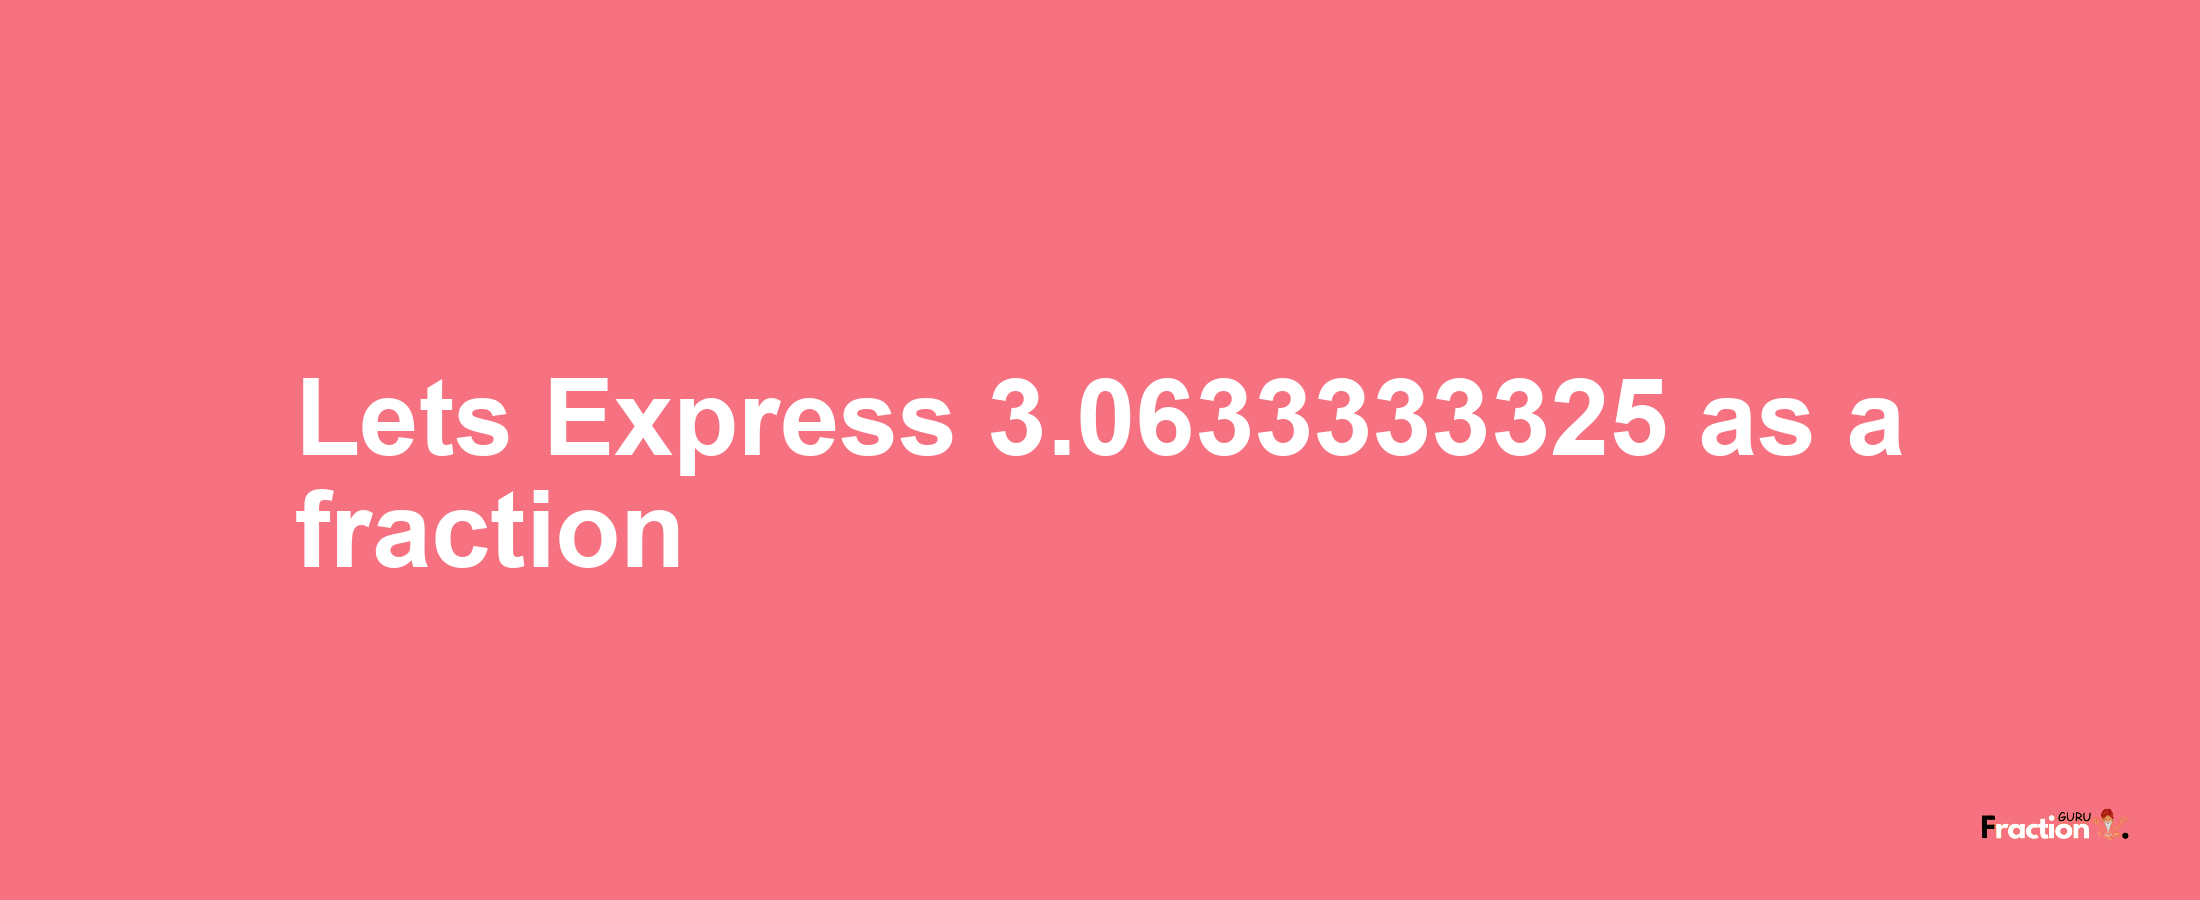 Lets Express 3.0633333325 as afraction